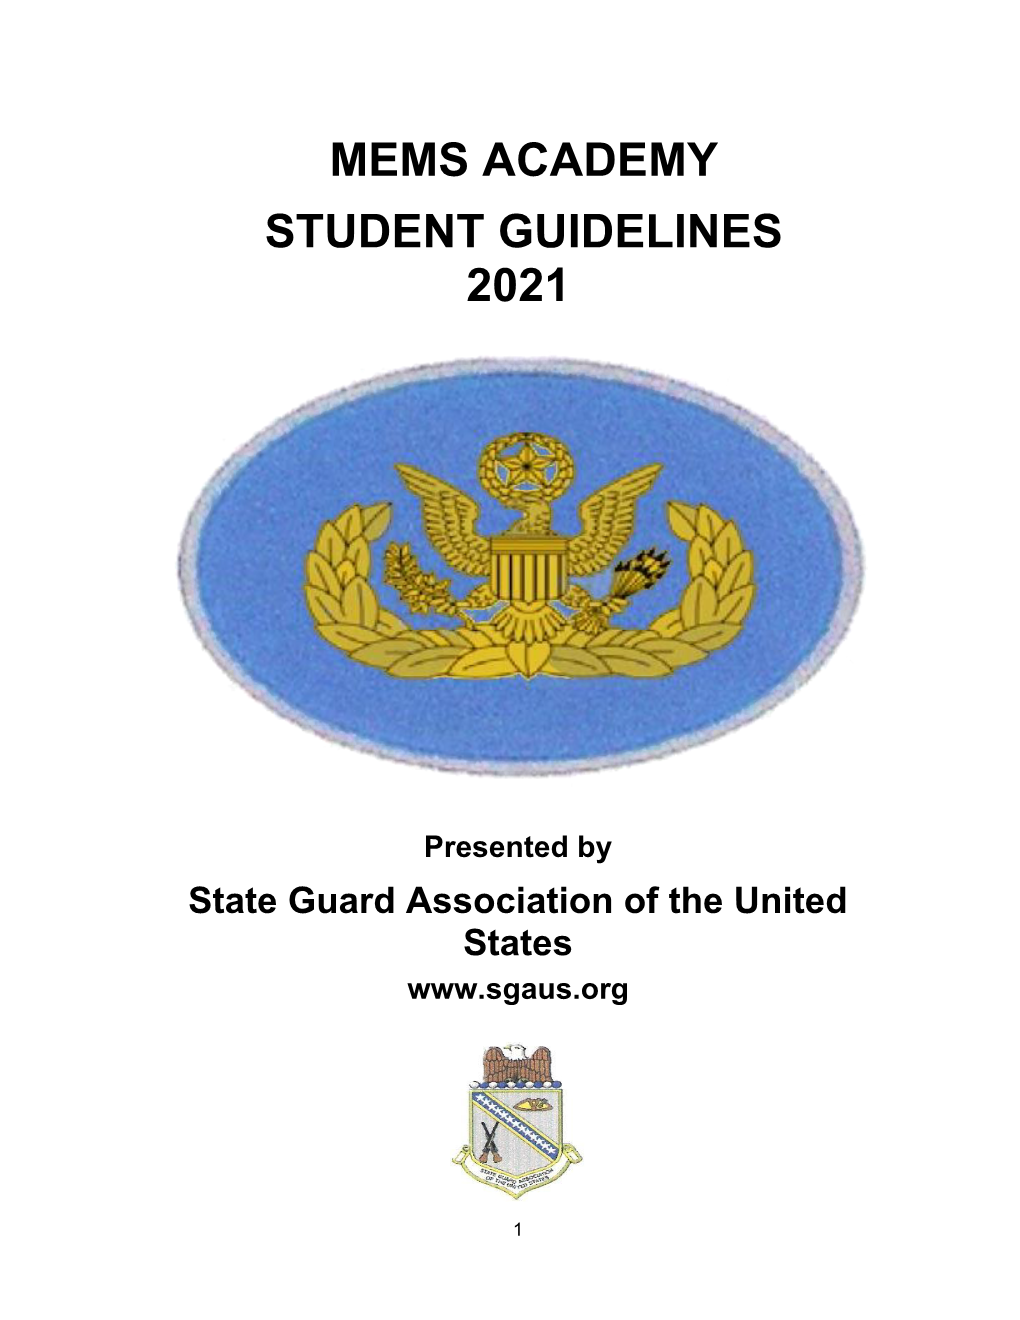 Mems Academy Student Guidelines 2021